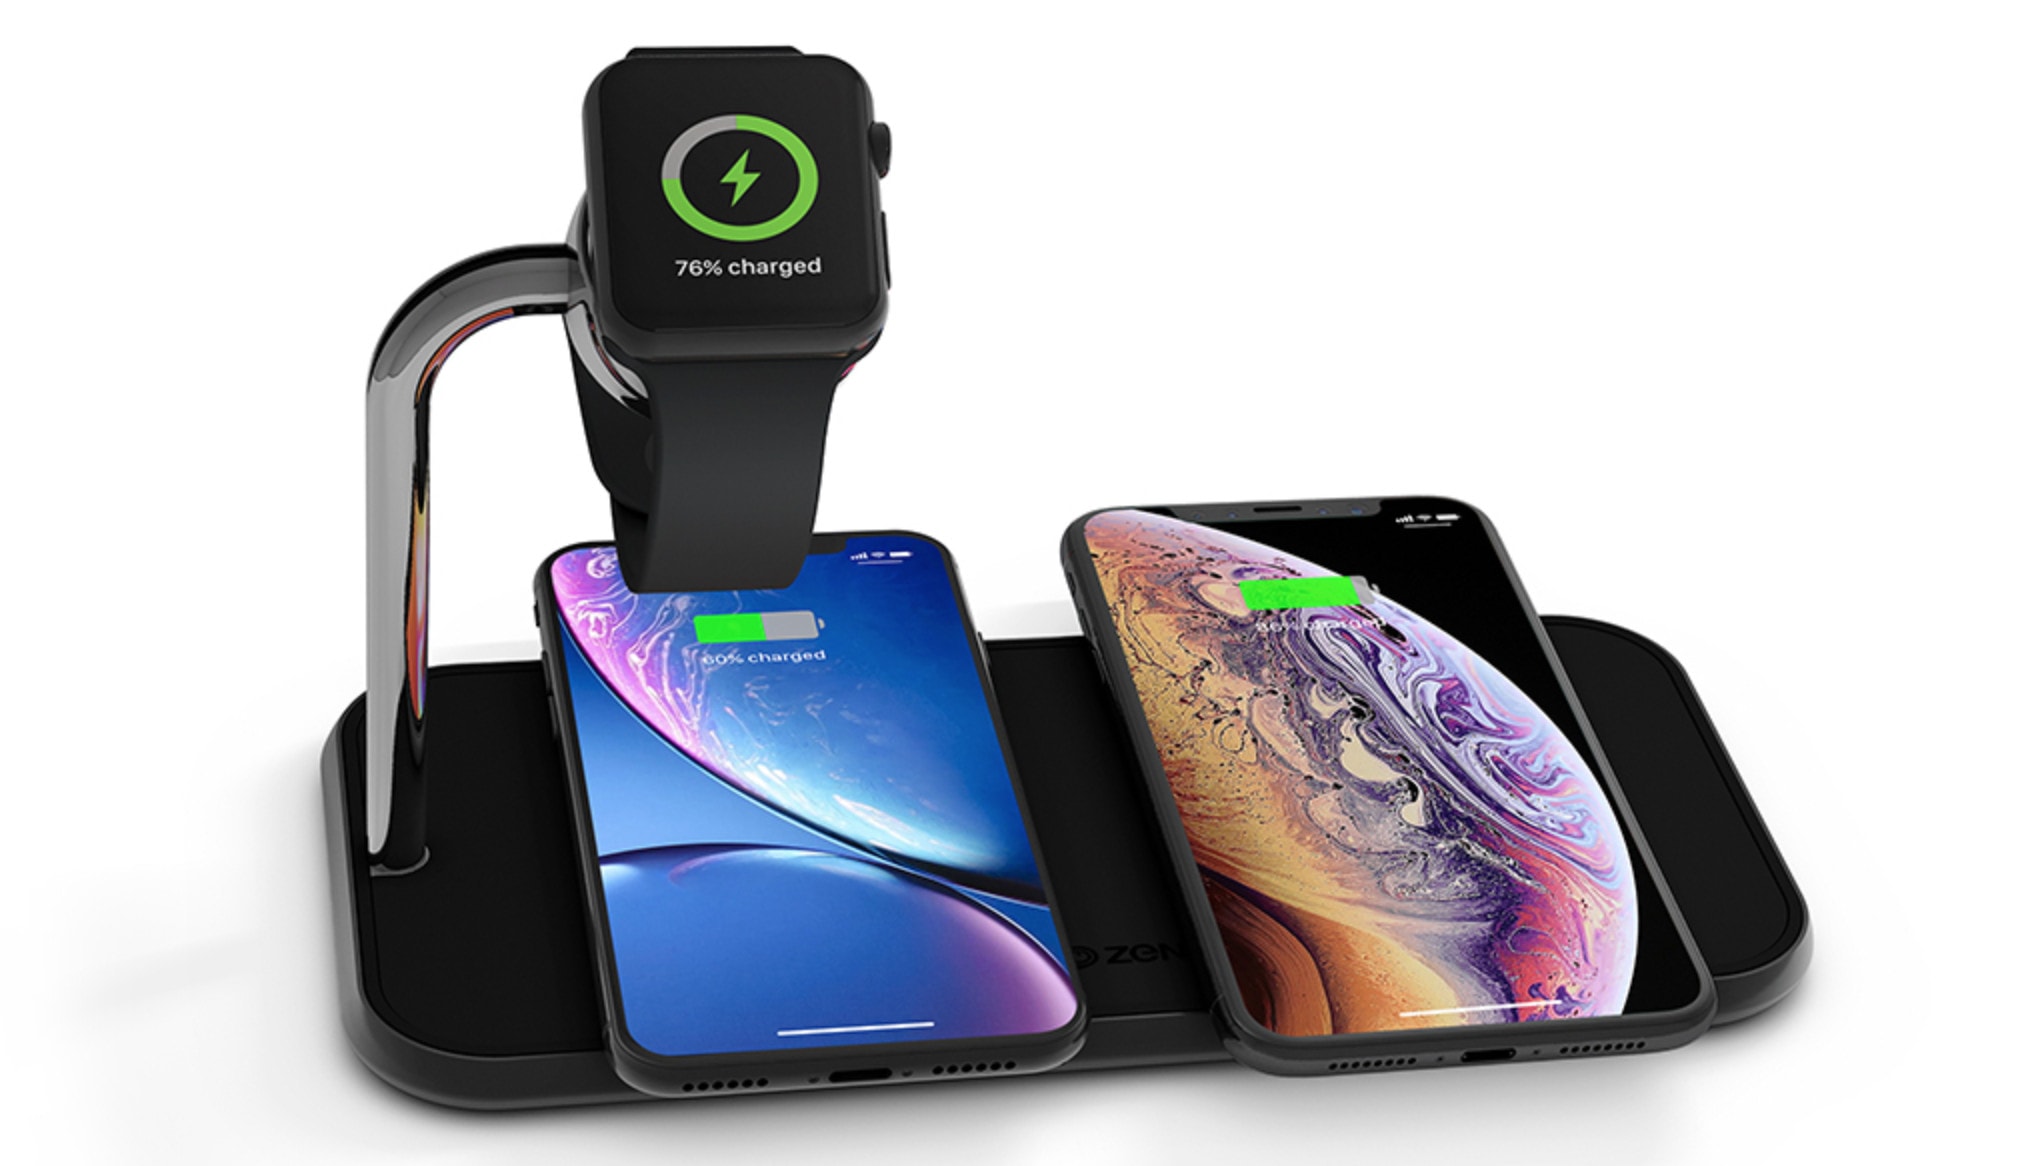 Akin to AirPower, Dual+Watch wireless charger displays and charges multiple devices simultaneously. 